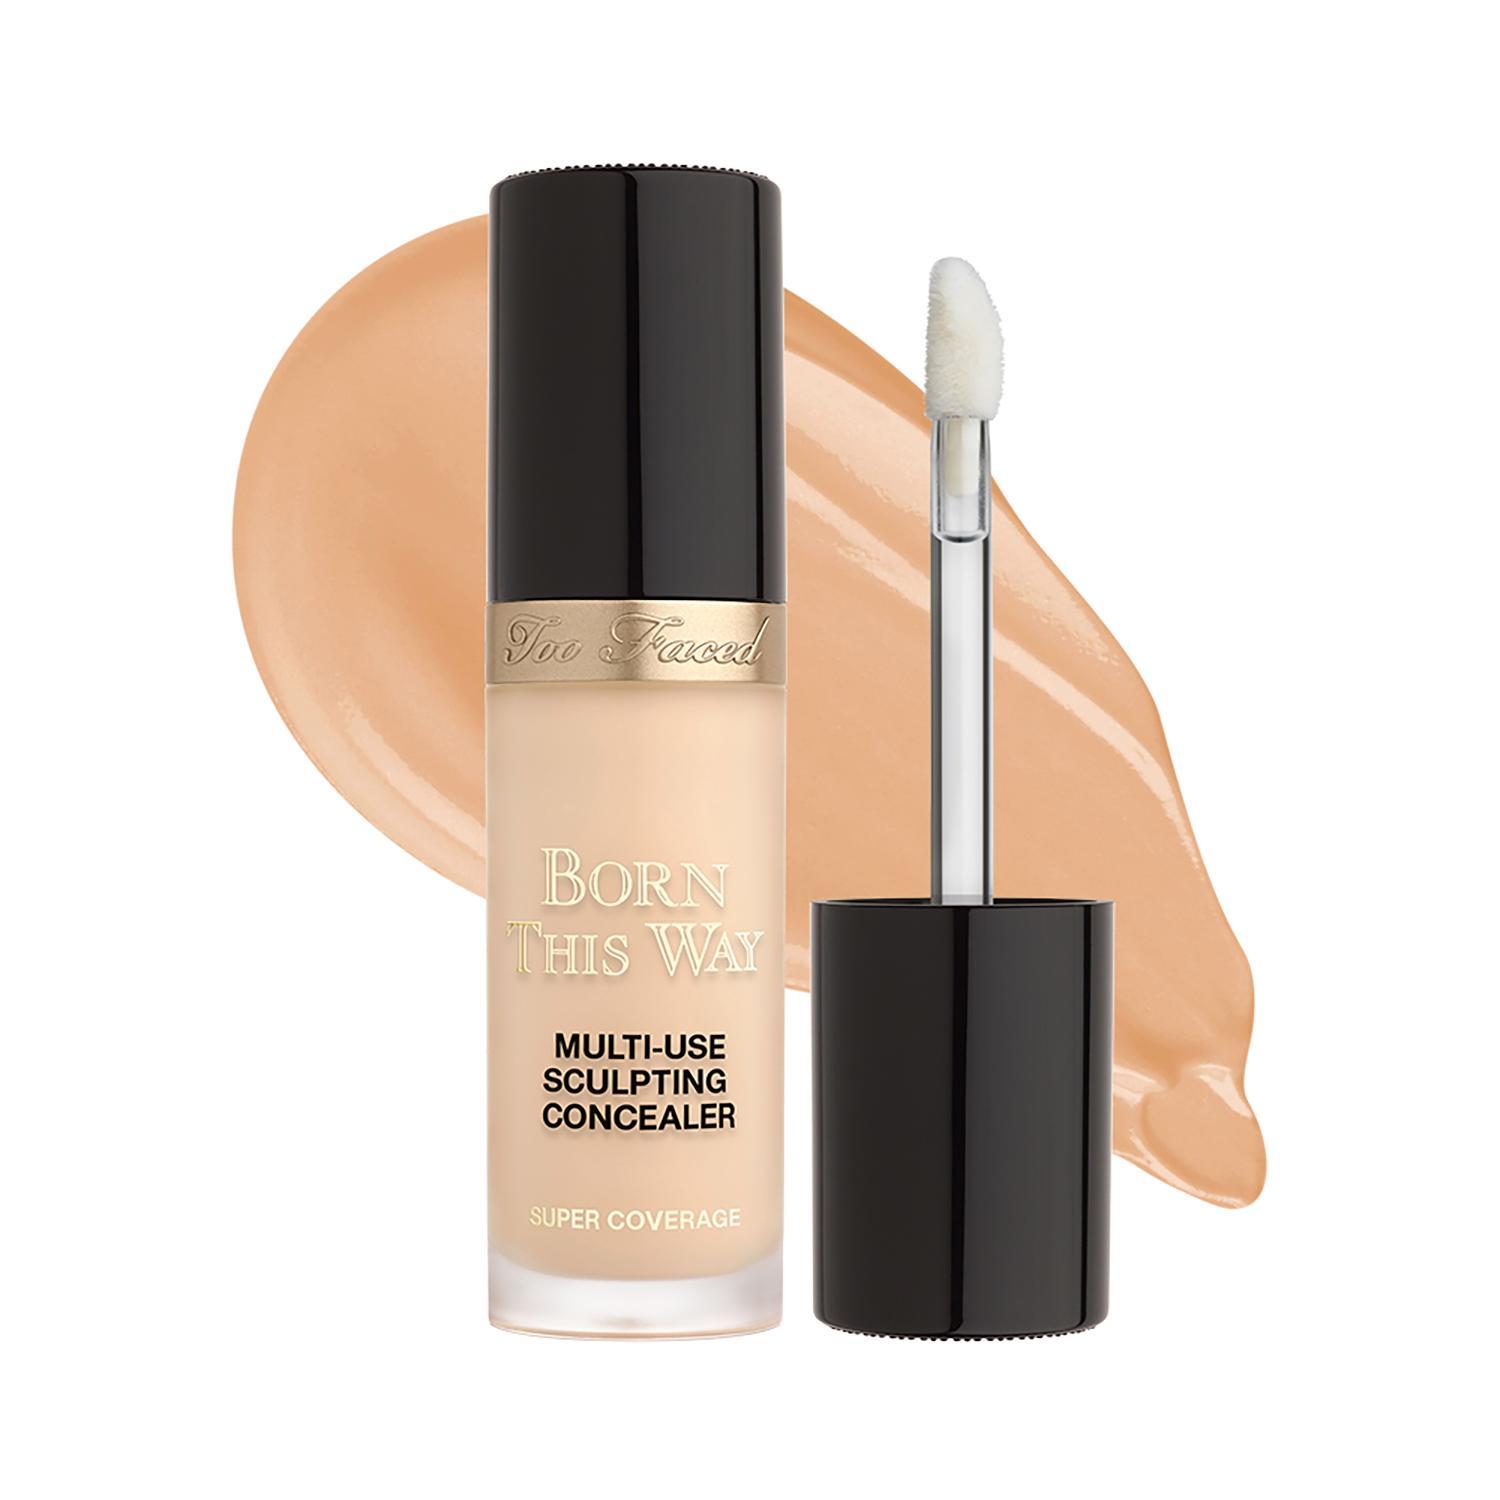 too-faced-born-this-way-super-coverage-multi-use-sculpting-concealer--nude-(13.5ml)